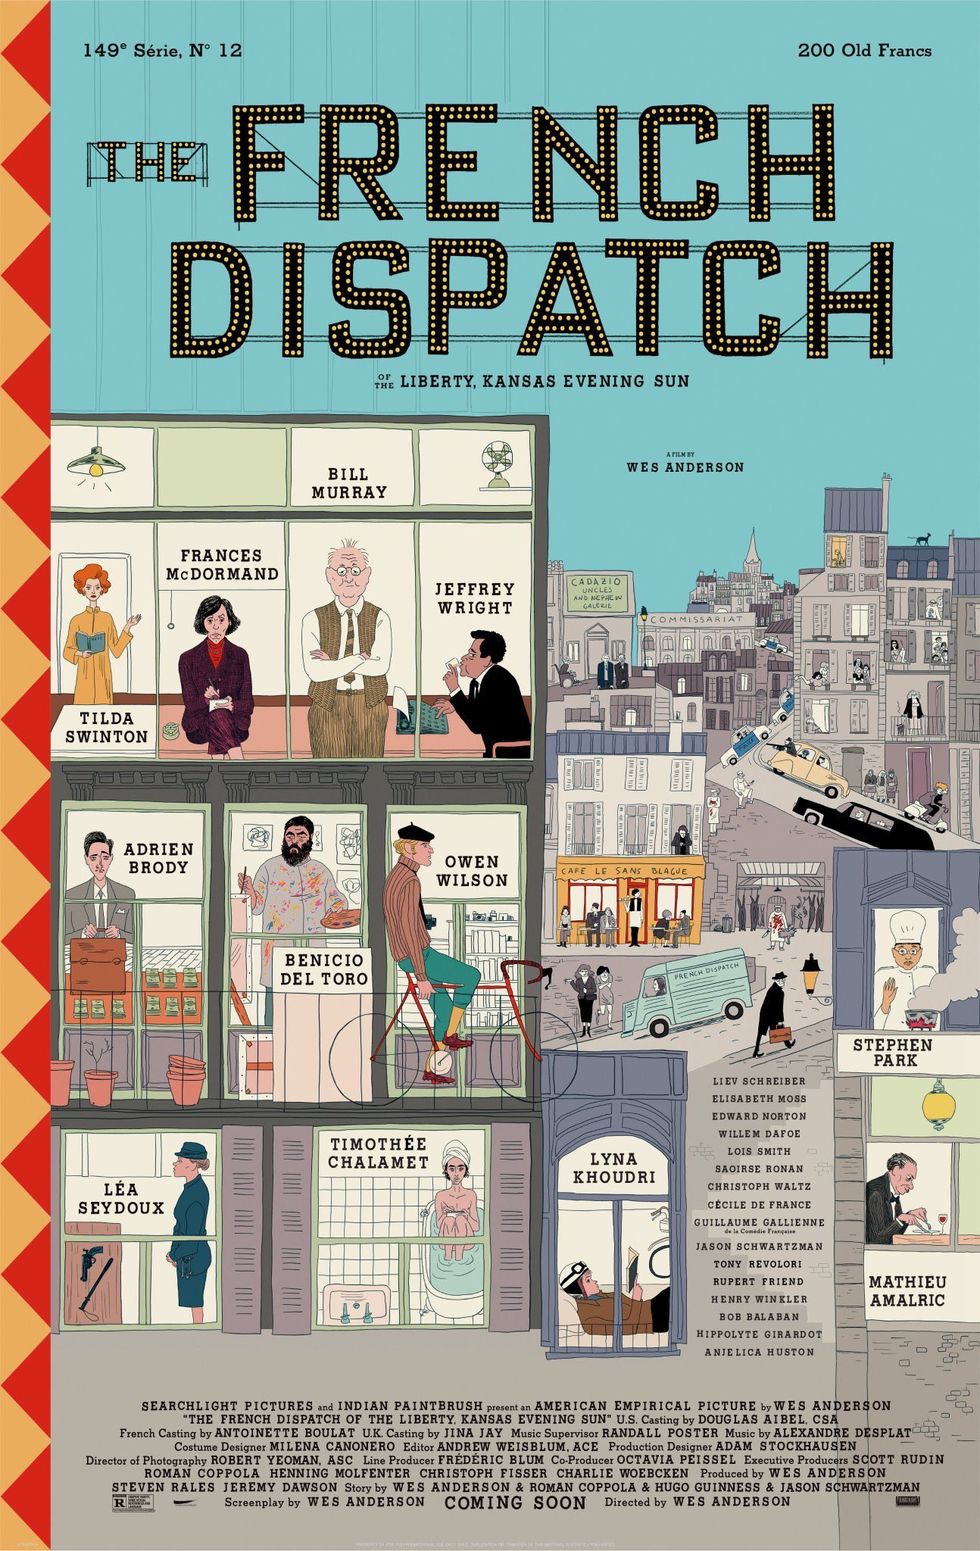 Wes Anderson French Dispatch